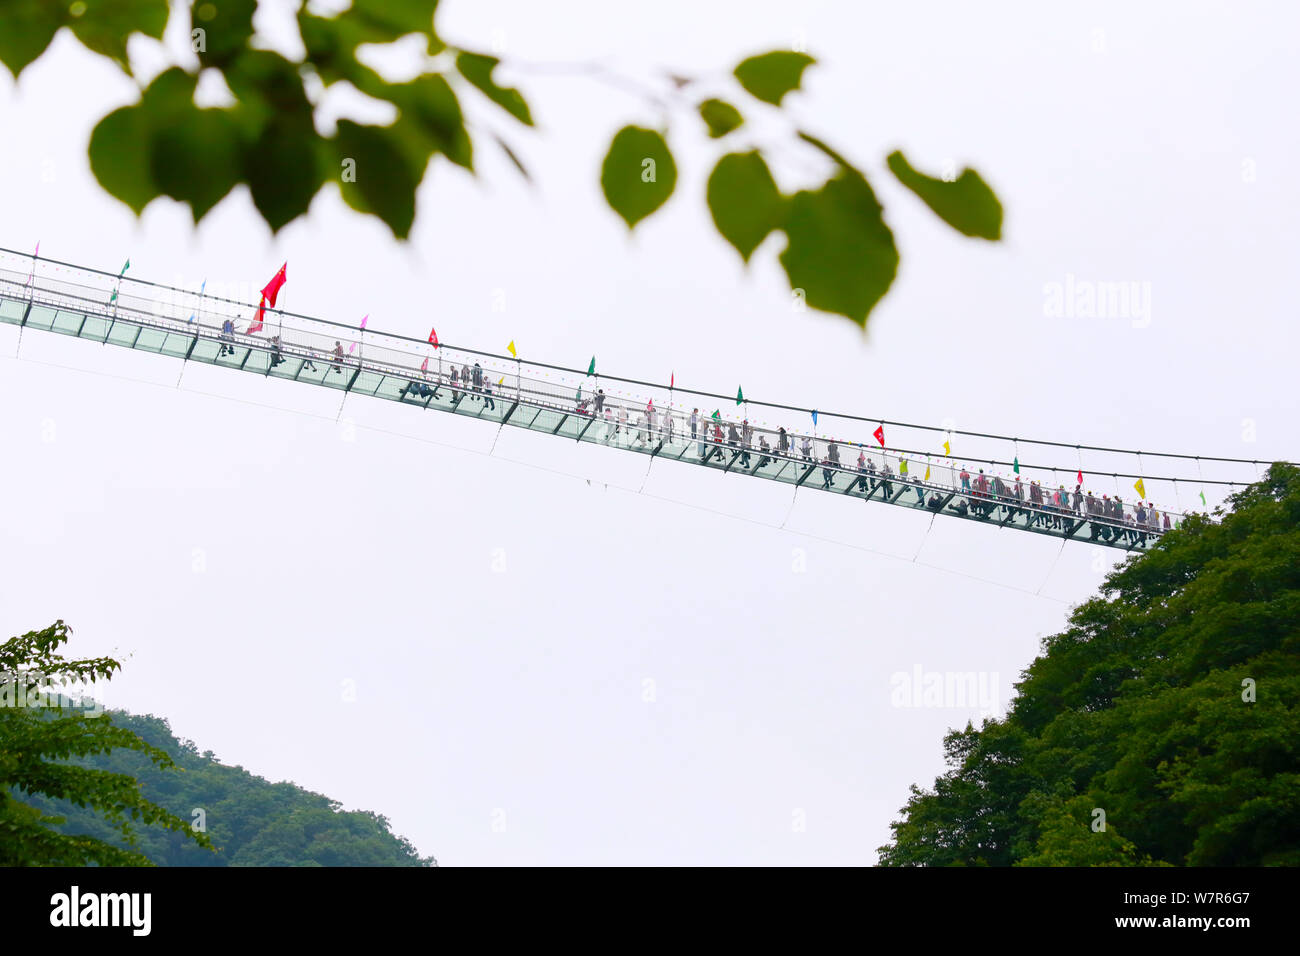 An worm's eye view of the glass bridge crowded with tourists at the Tianlongchi scenic area in Pingdingshan city, central China's Henan province, 11 J Stock Photo